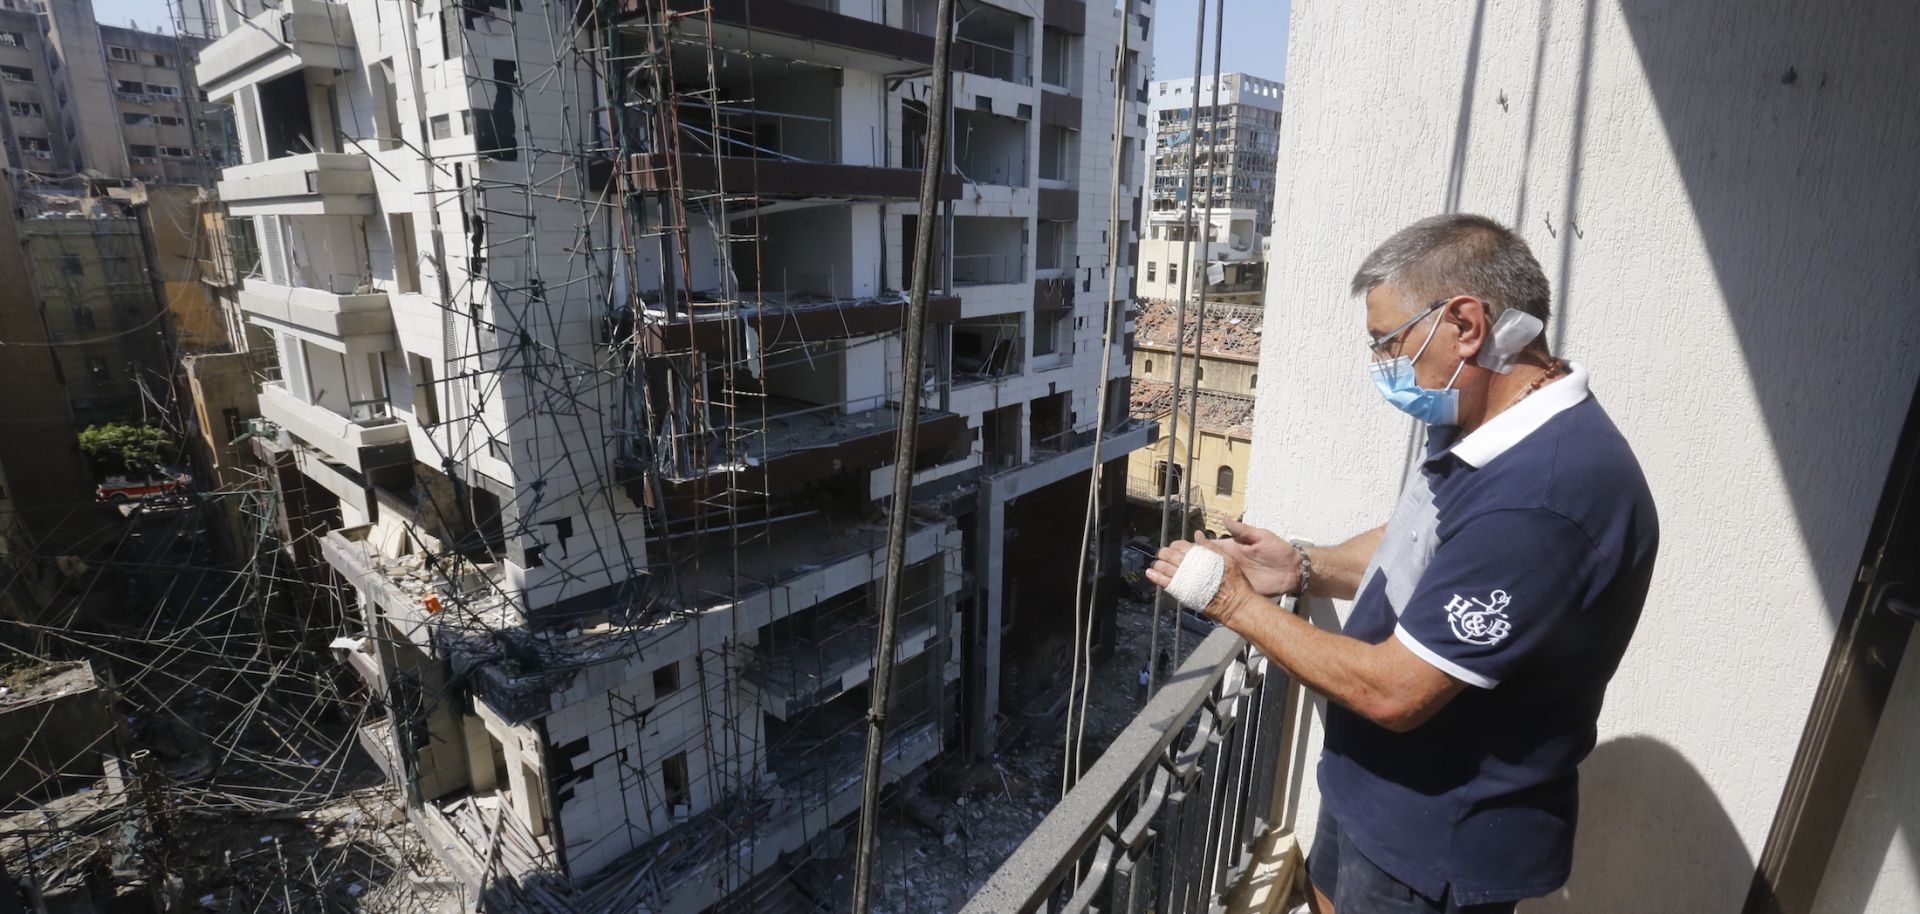 A man looks from the balcony of a building, damaged by the port explosion a day earlier, in Beirut, Lebanon on Aug. 5, 2020.